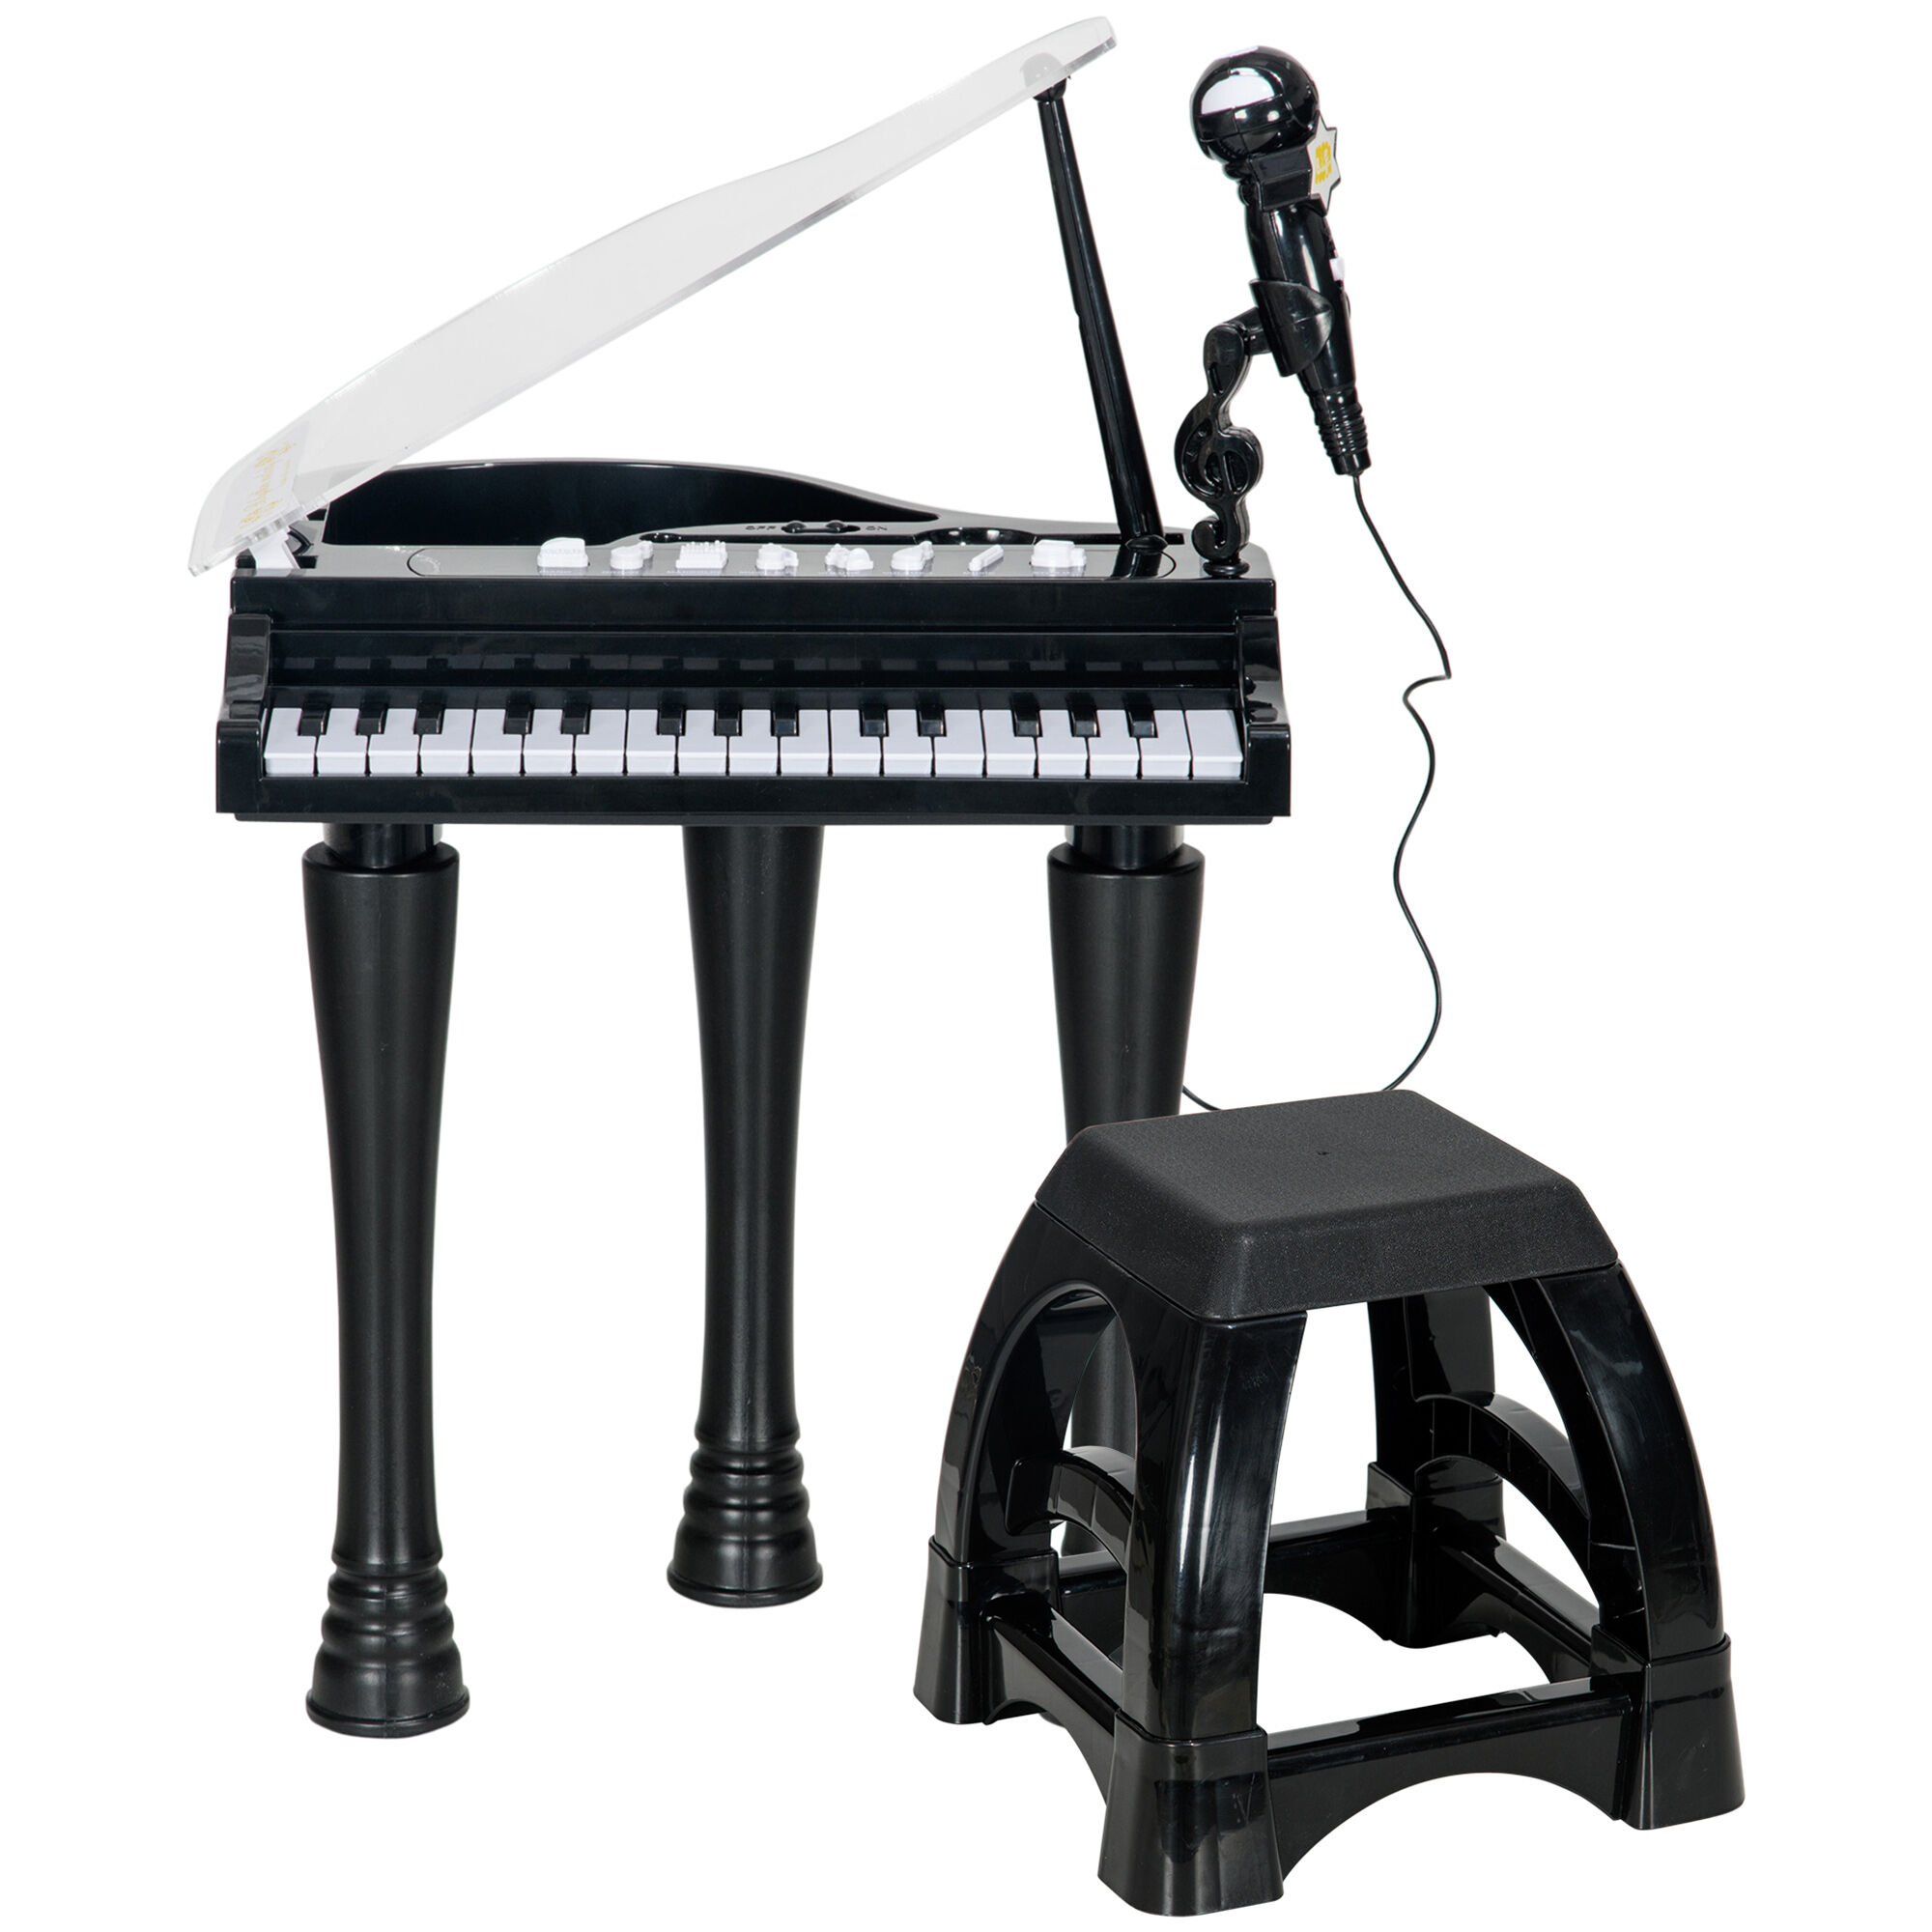 AIYAPLAY Children's 32-Key Piano Keyboard, with Stool, Lights, Microphone, Sounds, for Aspiring Musicians, Black